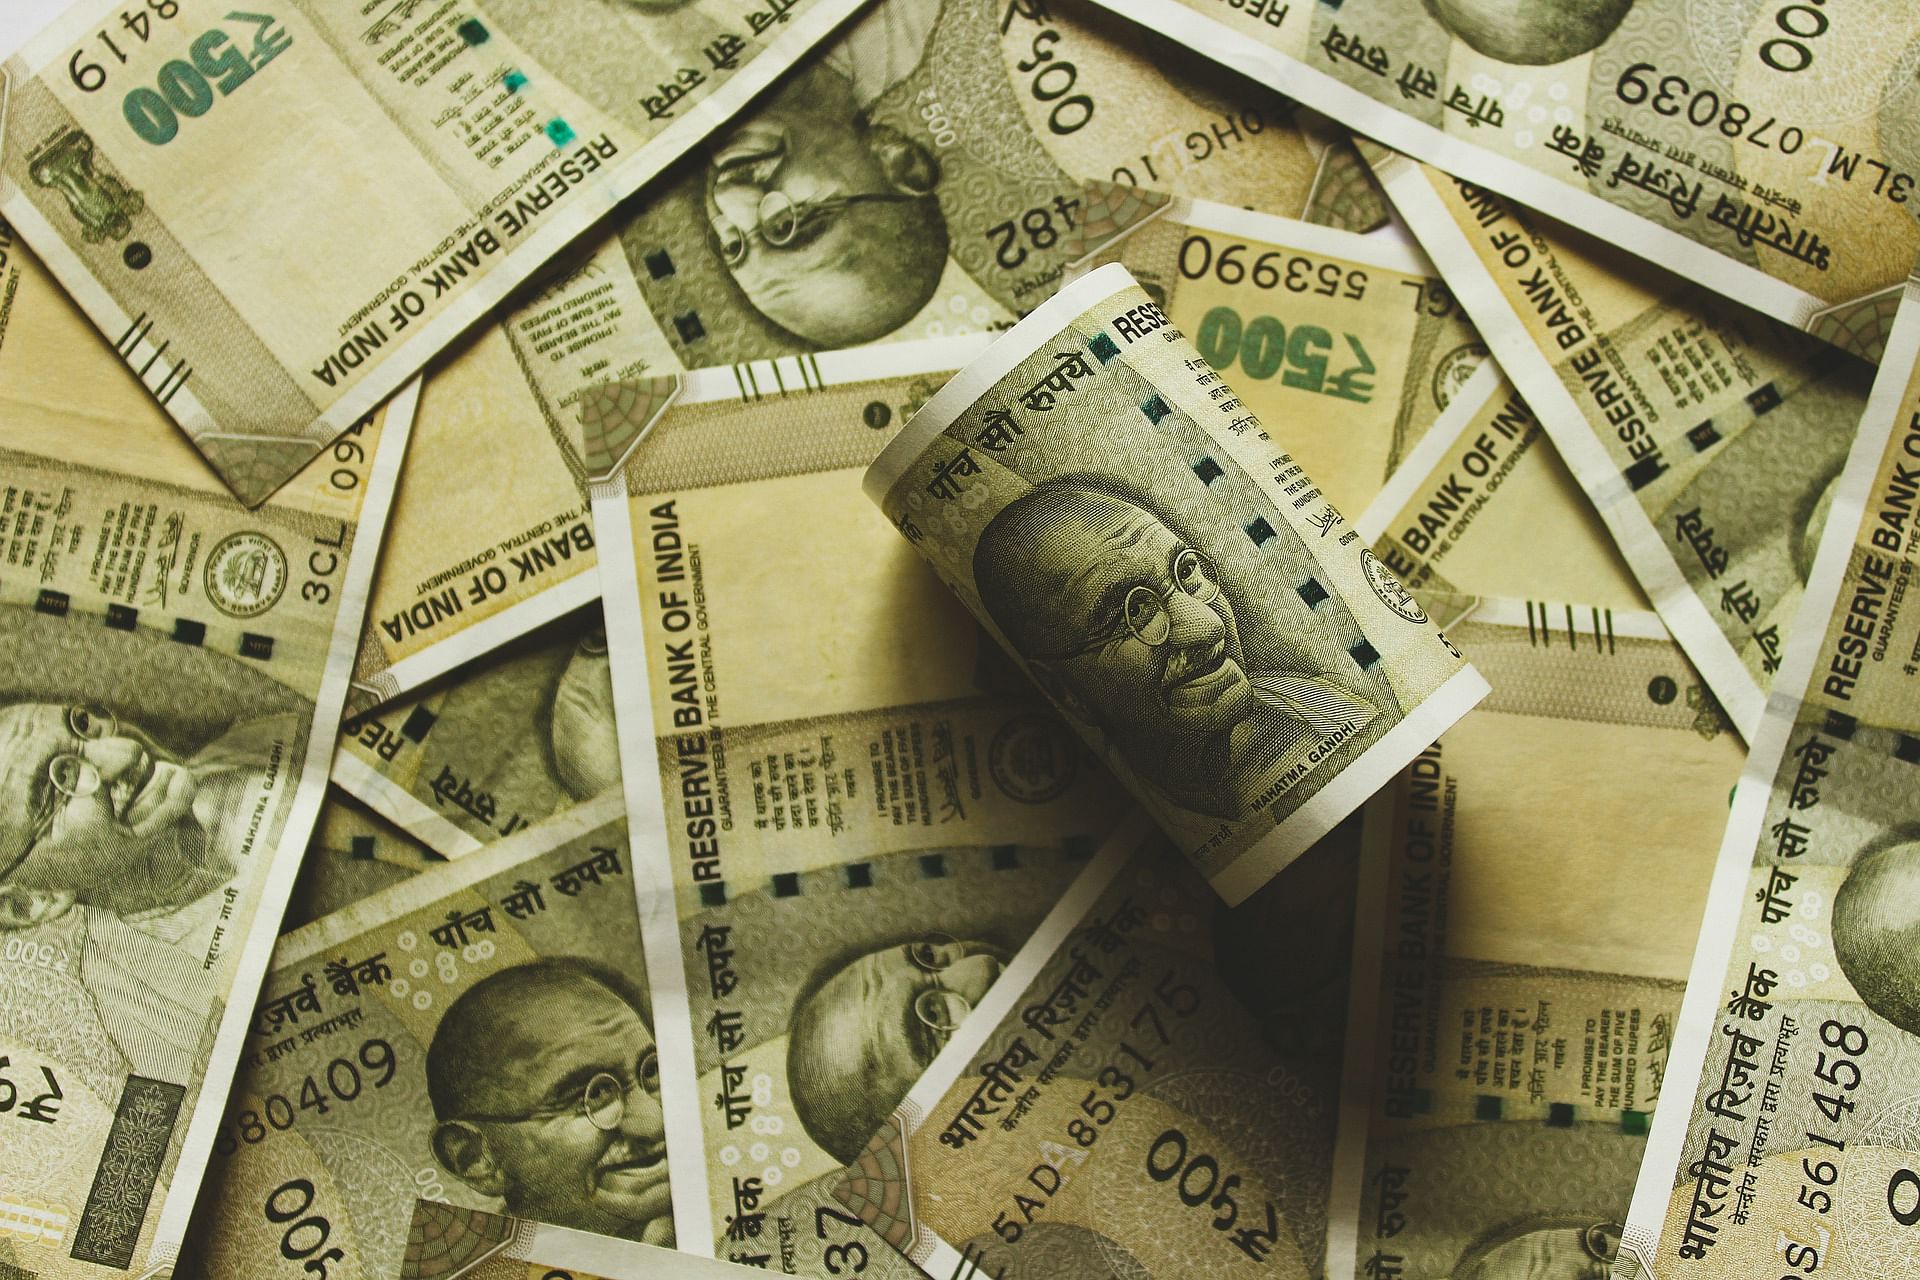 Rajendra Pawar demanded Rs 30,000 from an official of an educational institute here while promising to get it permanent registration for the current academic year, the Anti-Corruption Bureau (ACB) said in a release. Representative image/Pixabay